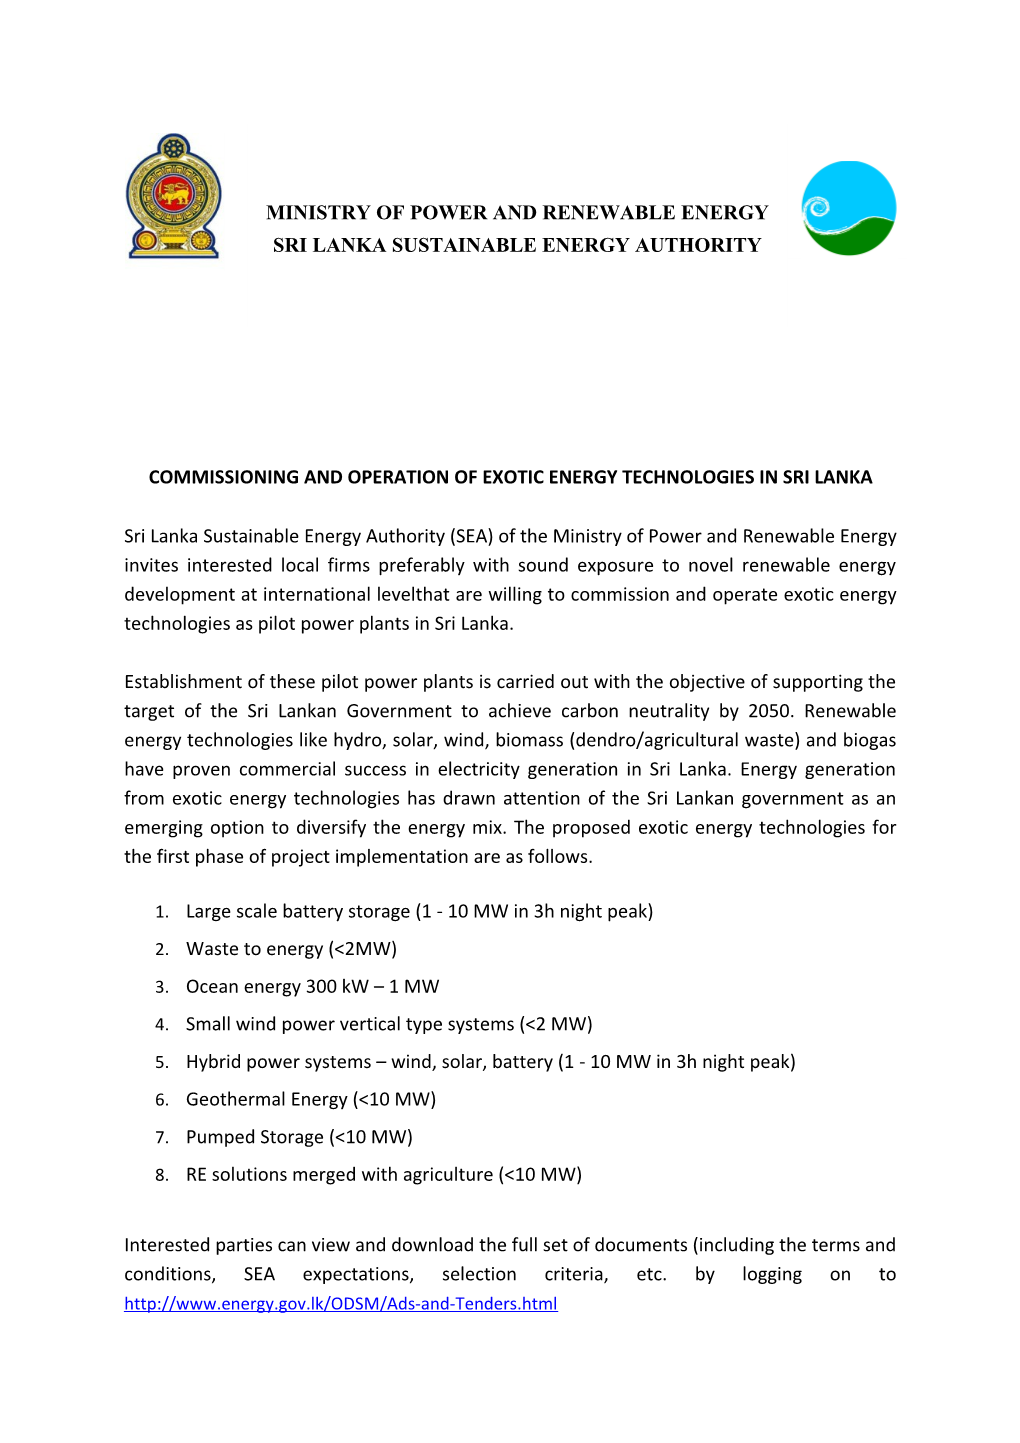 Commissioning and Operation of Exotic Energy Technologies in Sri Lanka